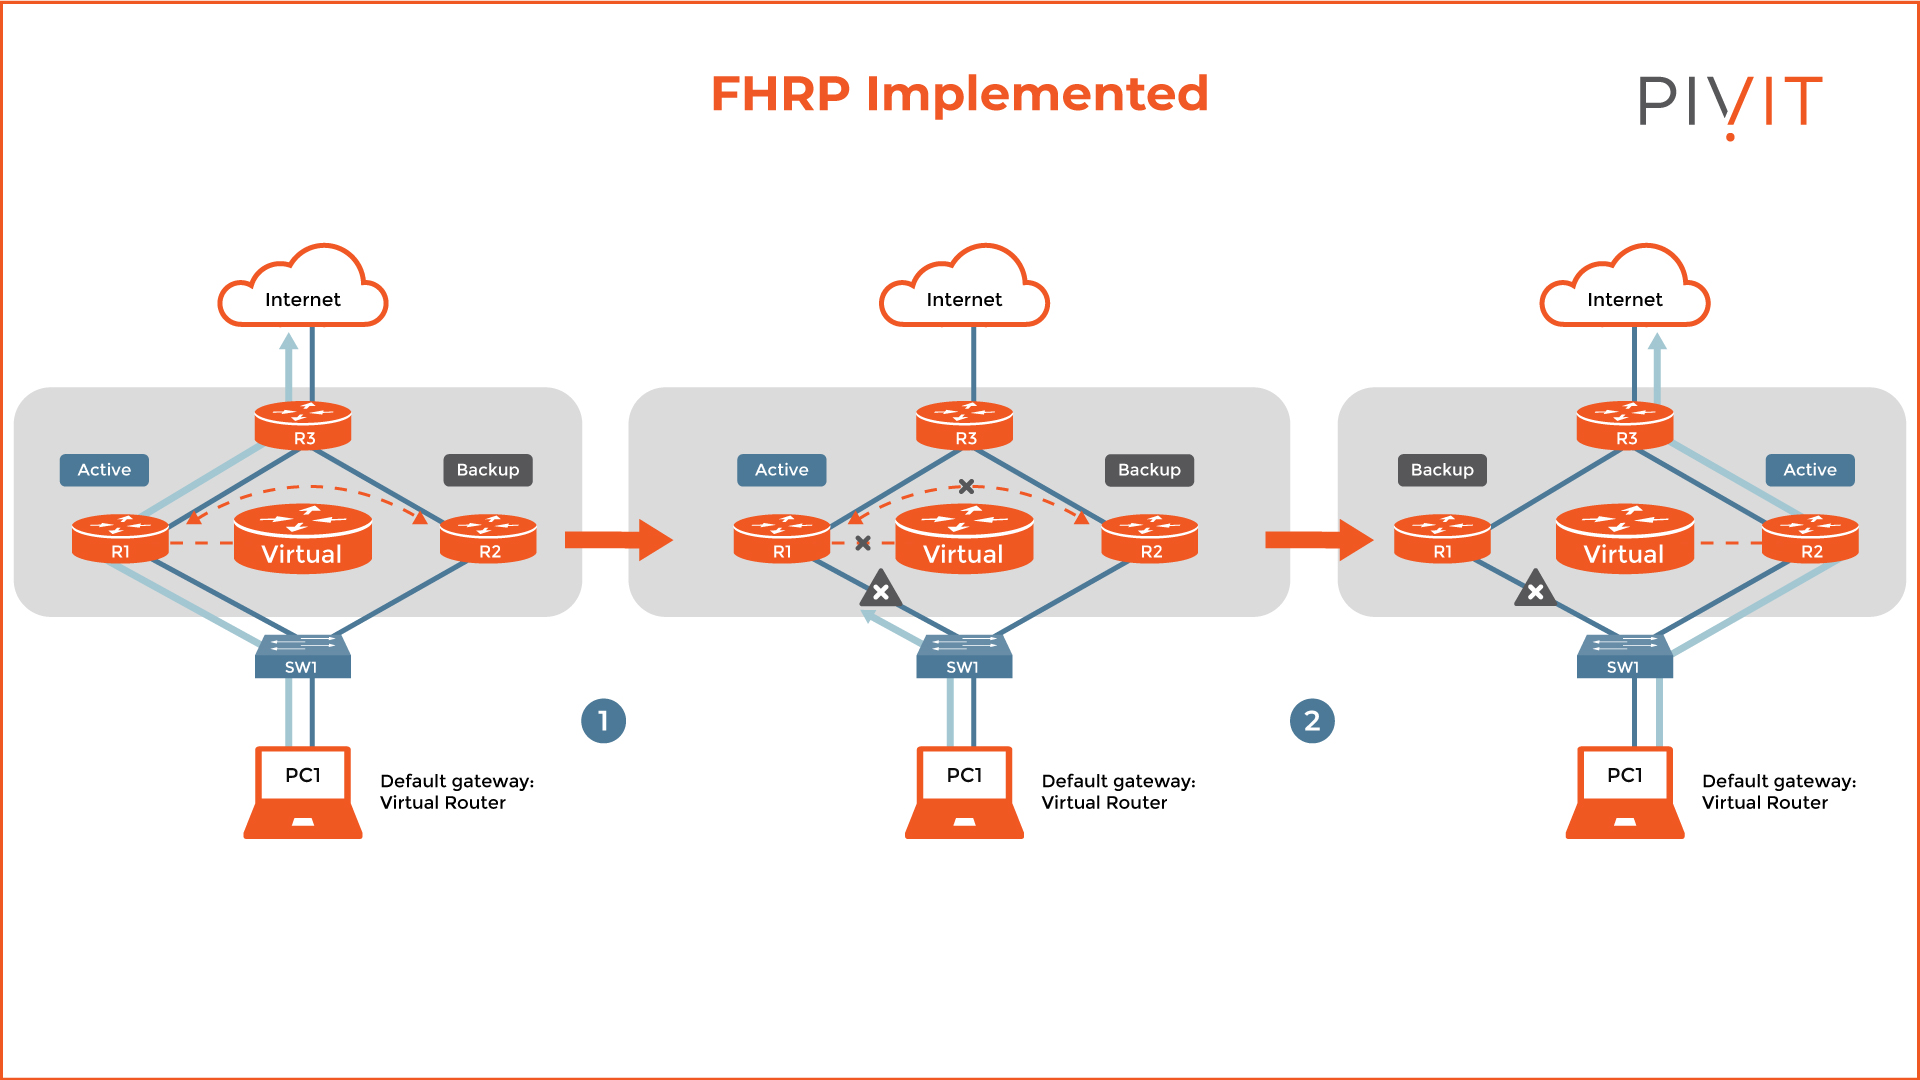 Example network topology when FHRP has been implemented